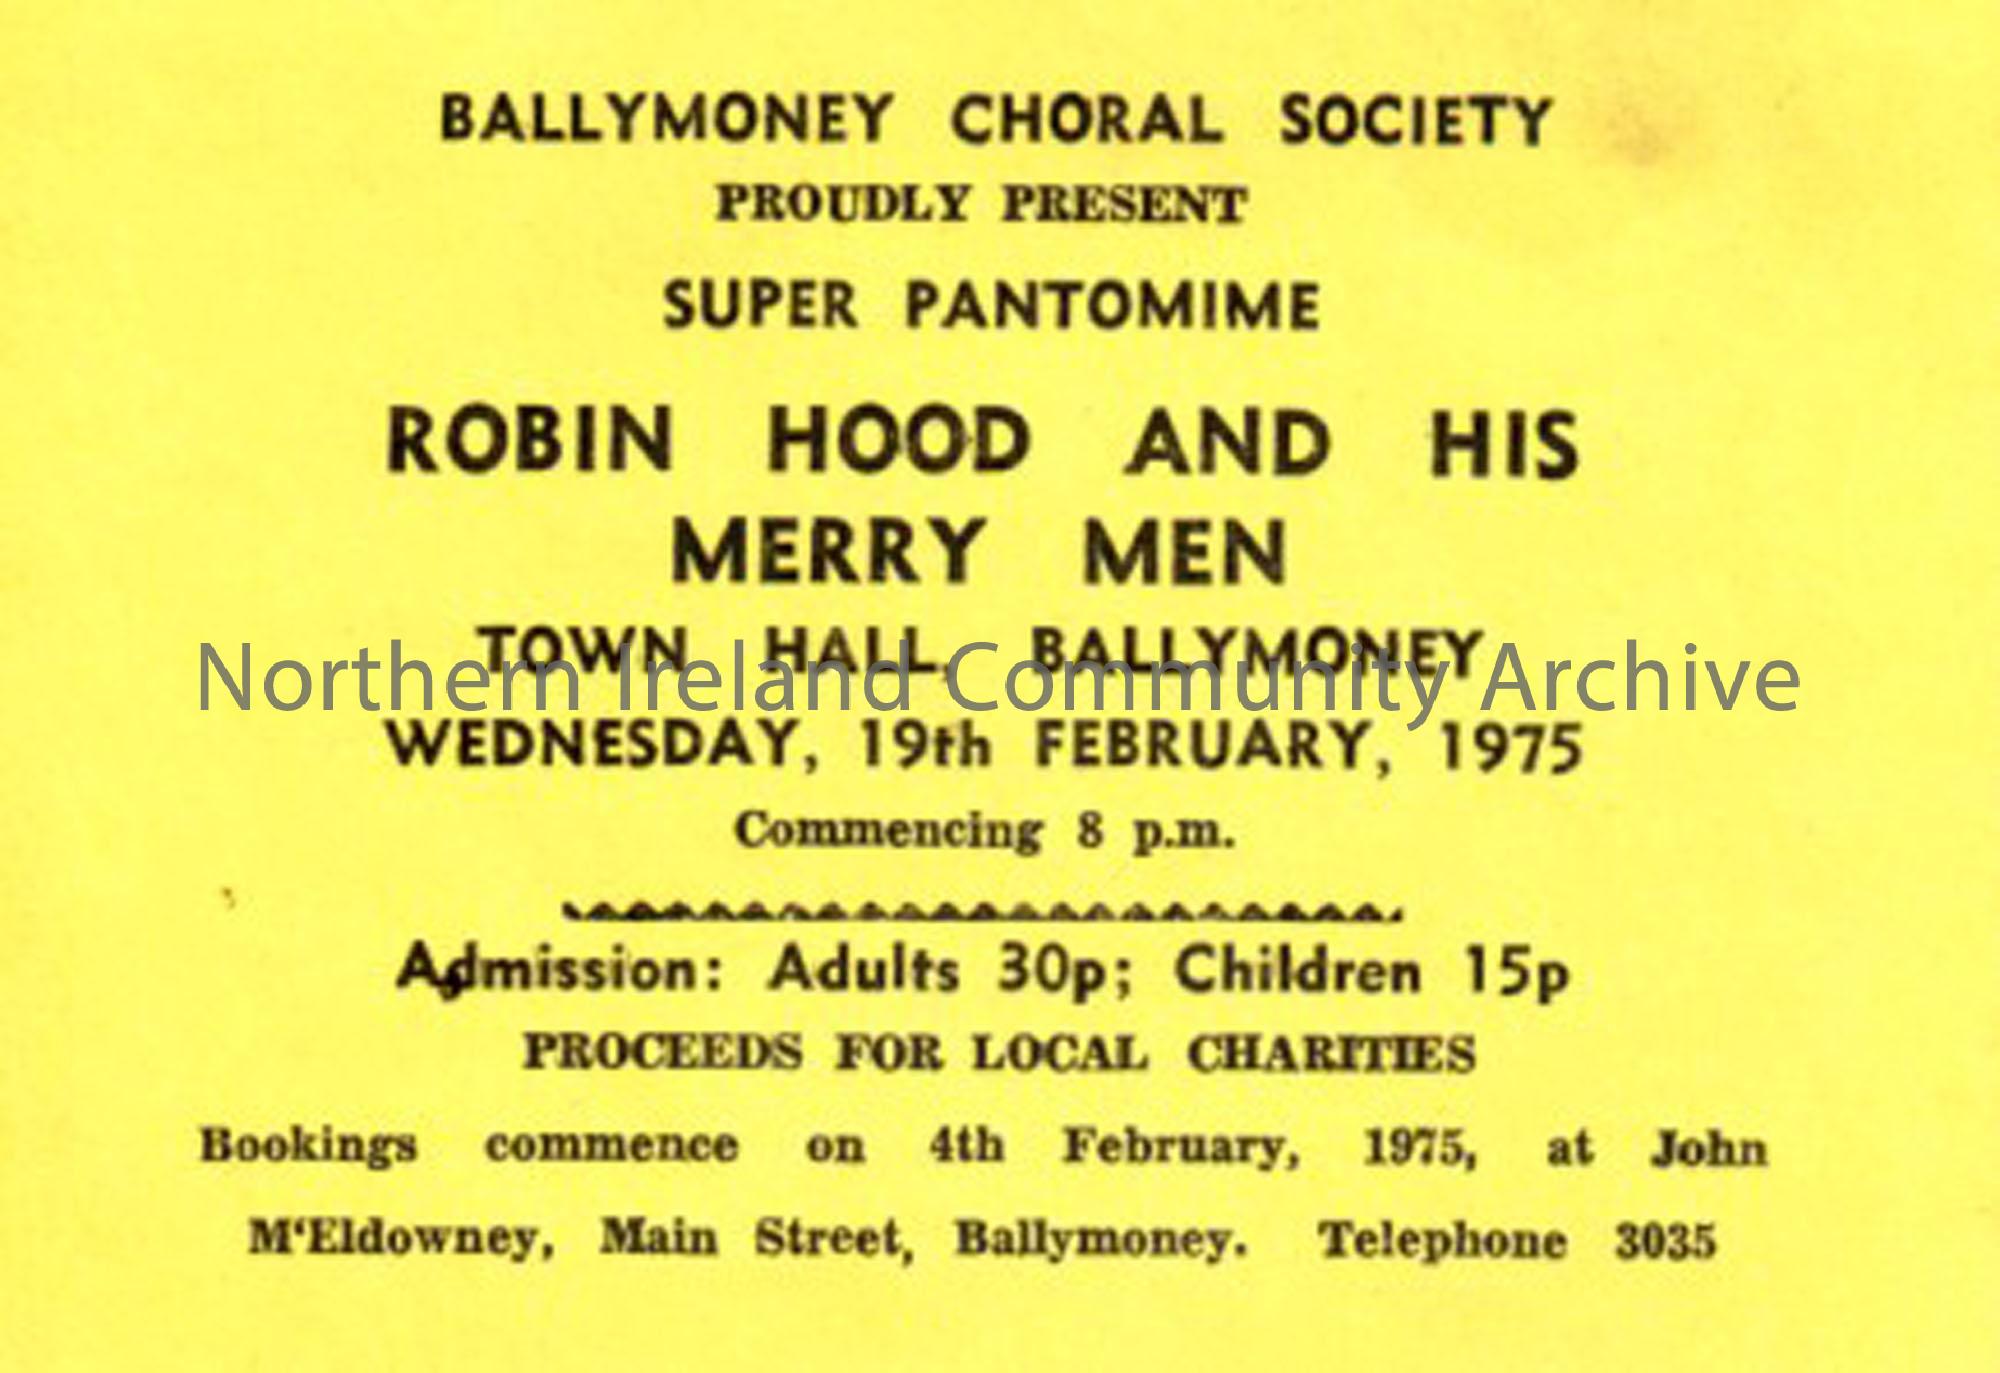 Ballymoney Choral Society yellow ticket for Robin Hood and his Merry Men, Town Hall, Ballymoney, Wednesday, 19th February, 1975.